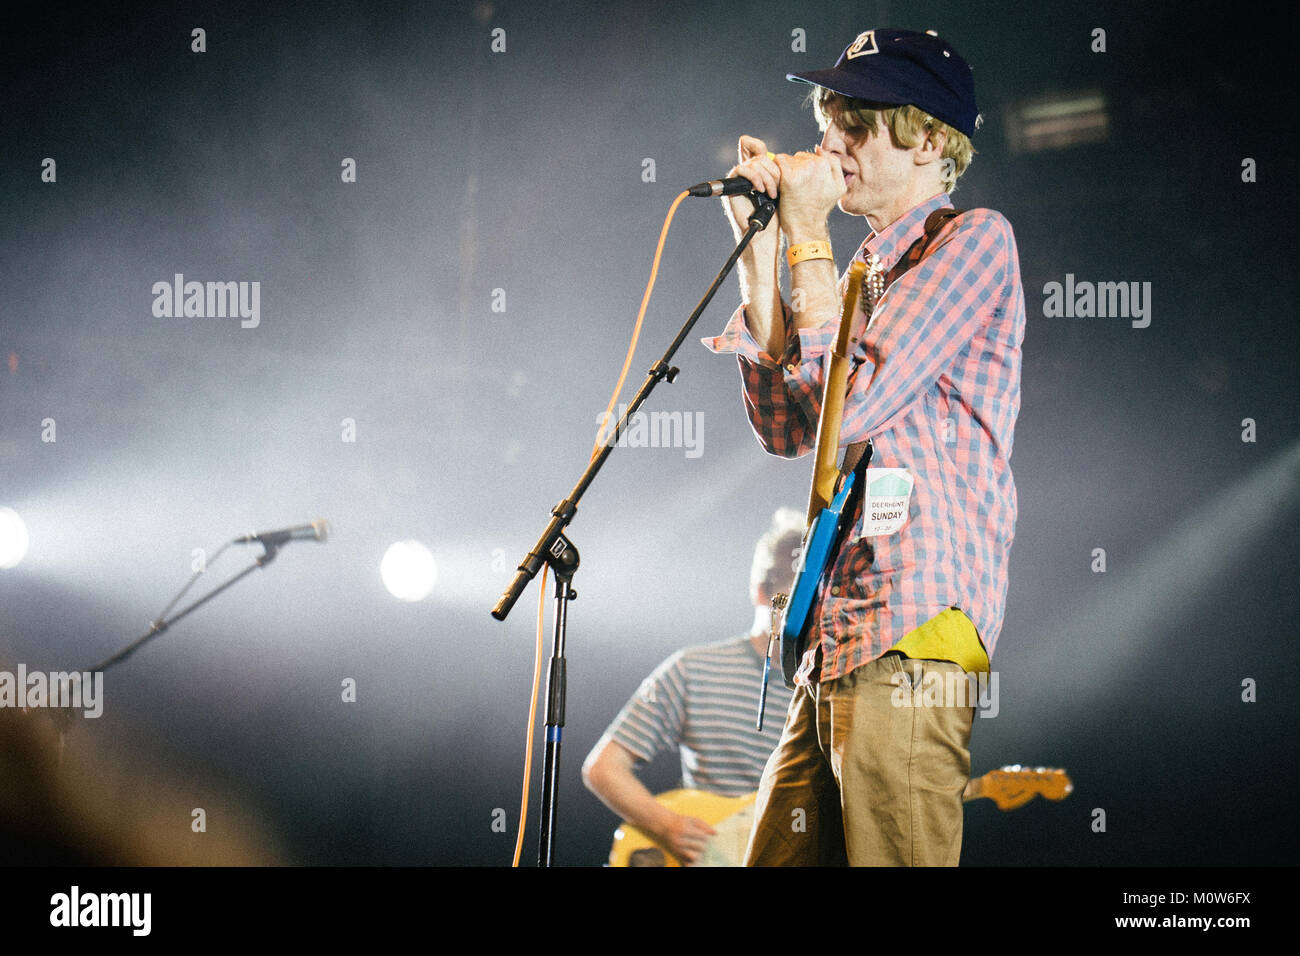 The American indie rock band Deerhunter performs a live concert at the Arena Stage at Roskilde Festival 2014. Here lead singer and musician Bradford Cox is pictured live on stage. Denmark 06.07.2014. Stock Photo